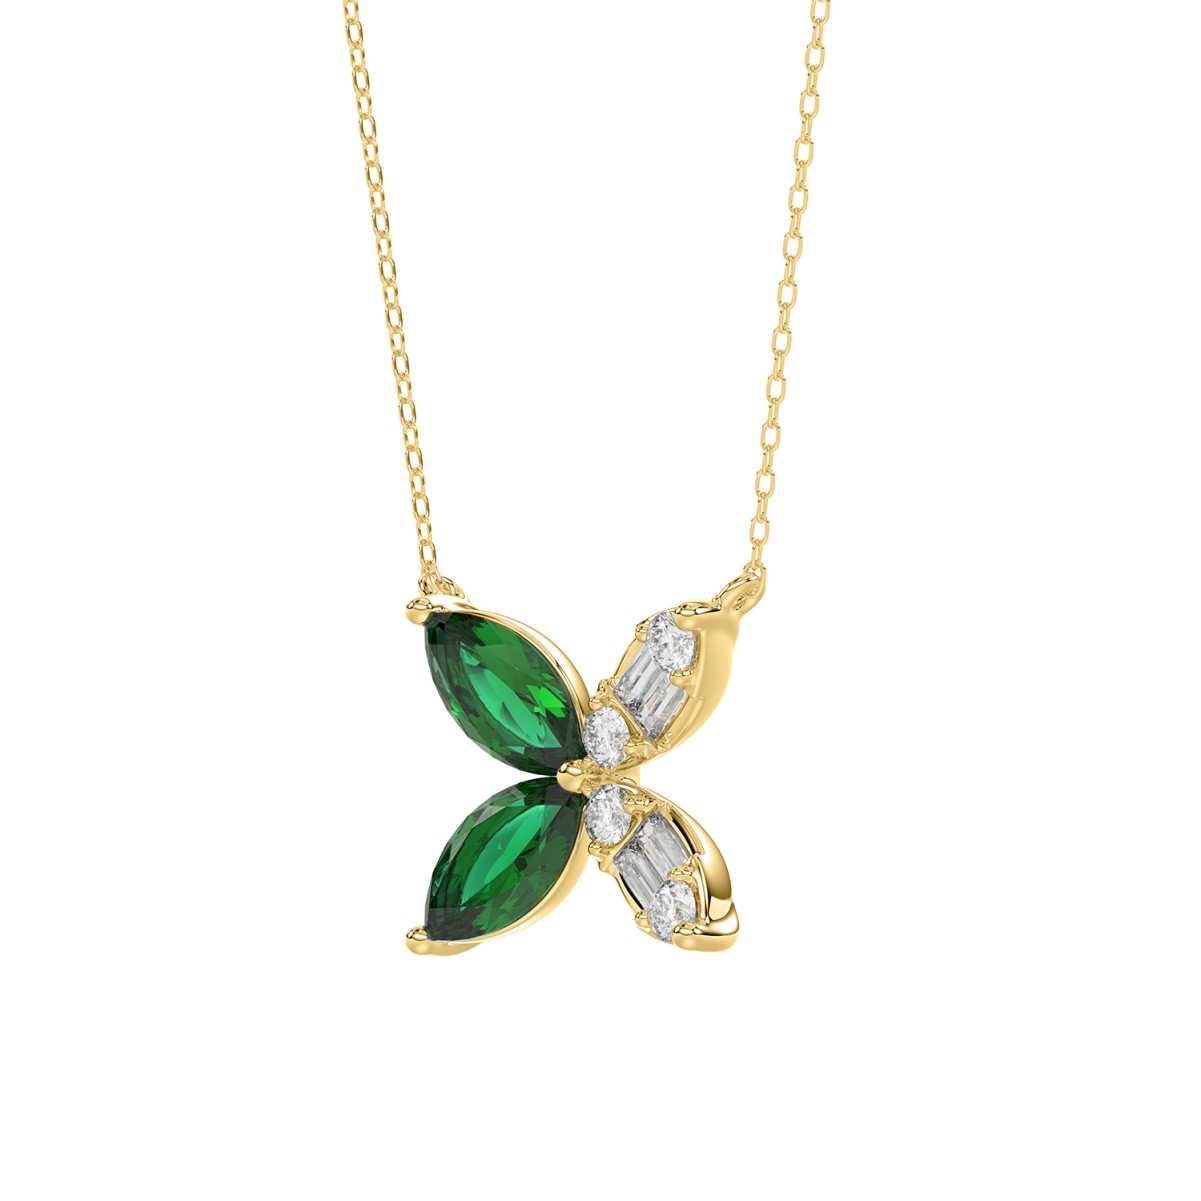 18K YELLOW GOLD 1 3/4CT ROUND/BAGUETTE/MARQUISE DIAMOND LADIES PENDANT WITH CHAIN(COLOR STONE MARQUISE GREEN EMERALD DIAMOND 1 5/8CT)